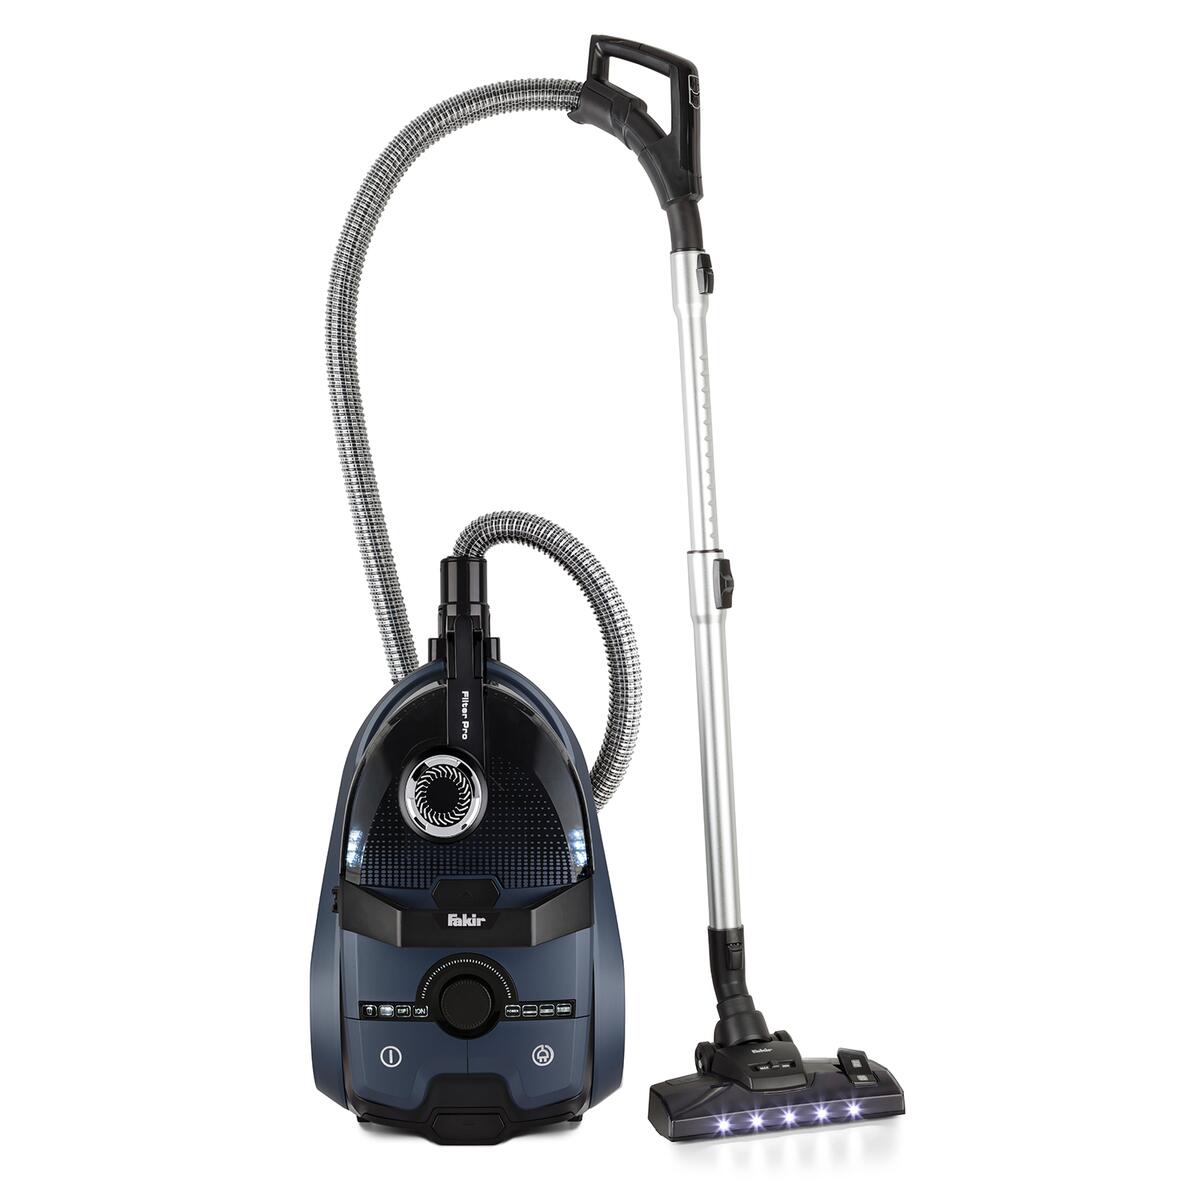 Fakir Filter Pro Bagless Cyclone Vacuum Cleaner Black & Silver, FILTER PRO-BOR